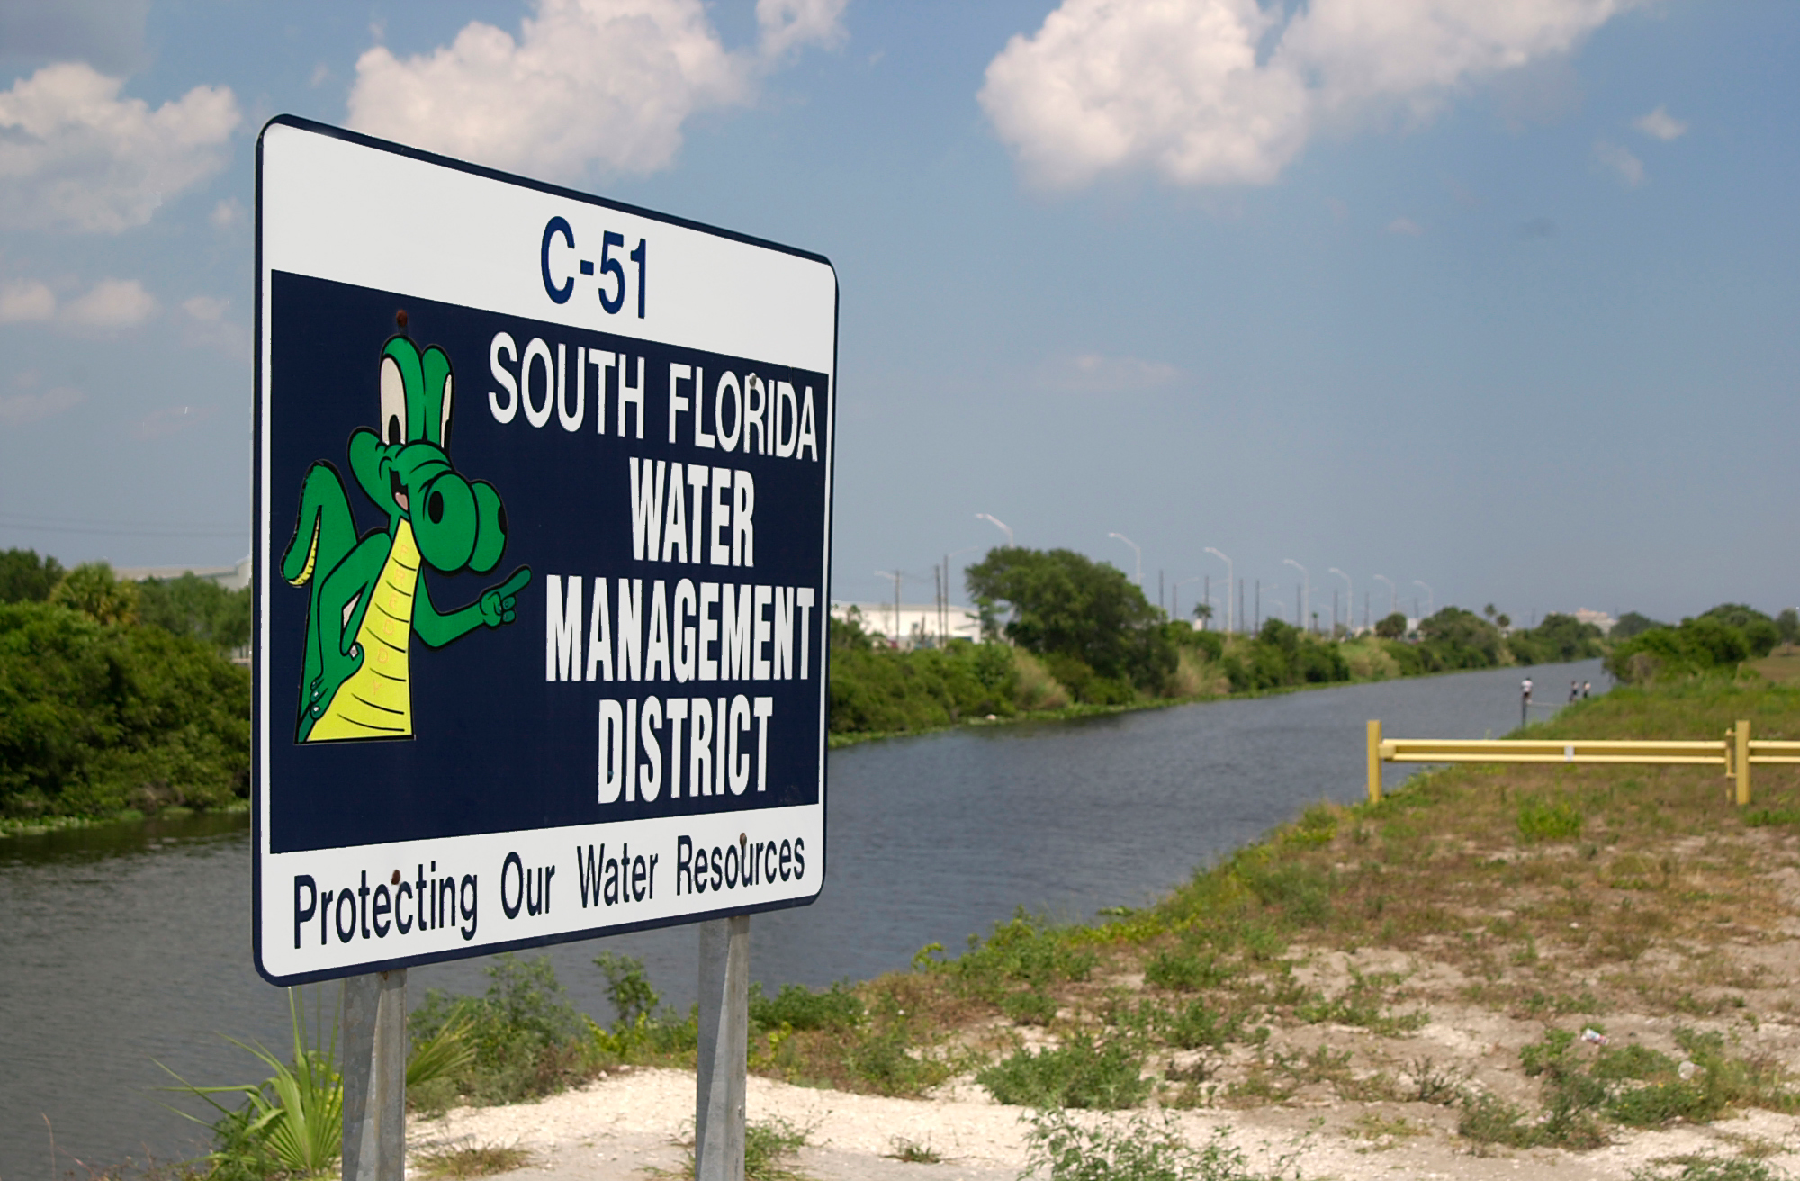 Government image of South Florida Water Management District sign